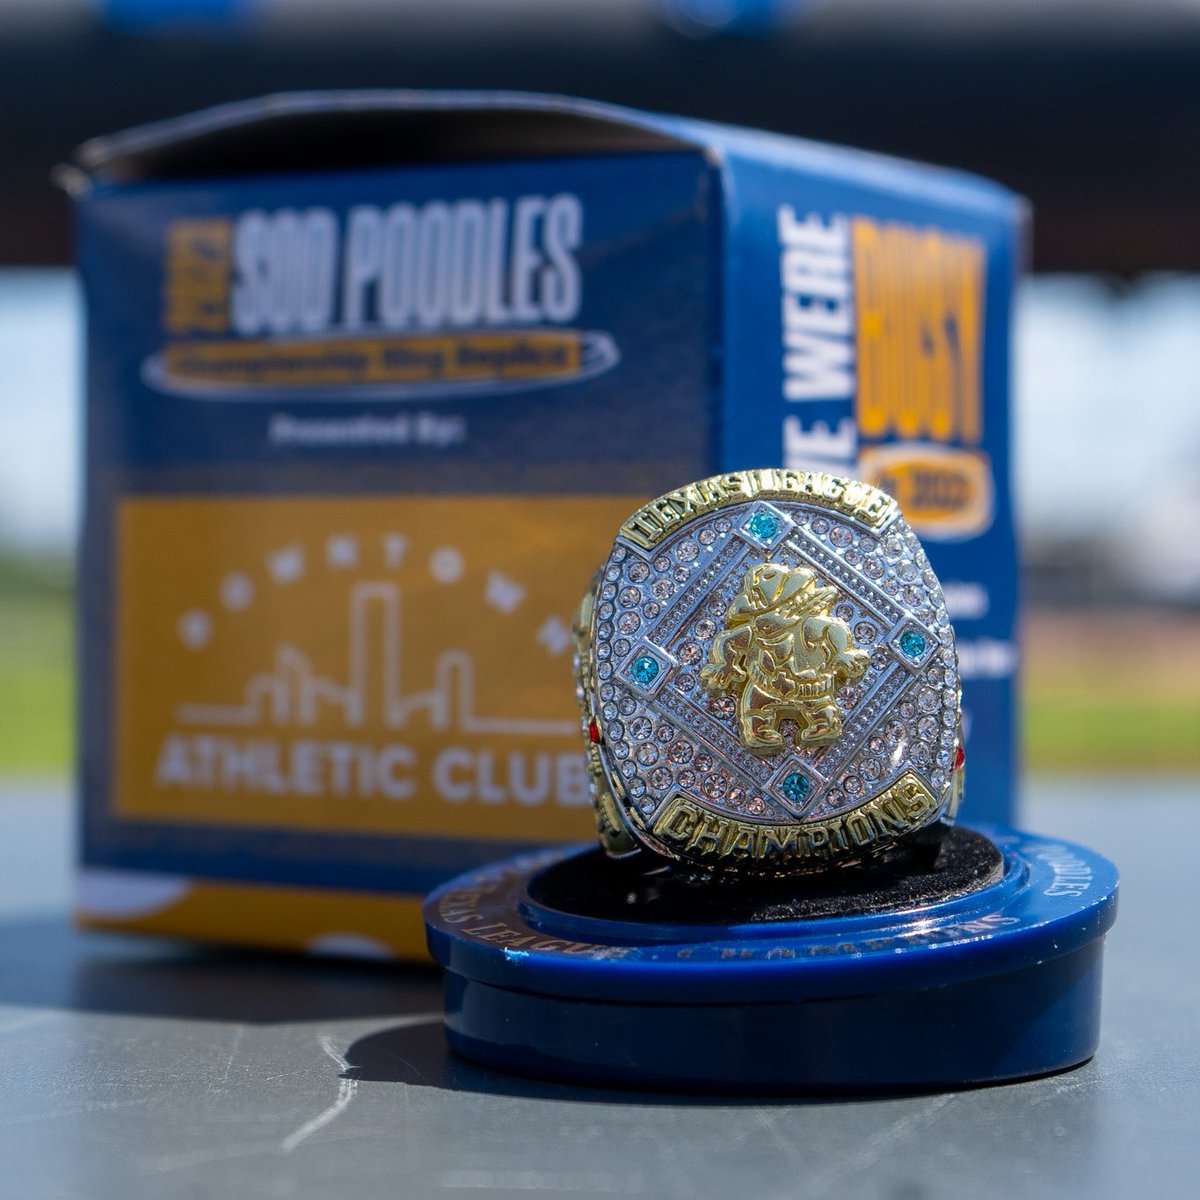 It's Championship night at HODGETOWN 🏆 The players will be wearing championship jerseys, a special ceremony will take place pre-game, AND we're giving away replica rings for the first 1,500 fans 13 and up. 🎟 bit.ly/Soddies042024